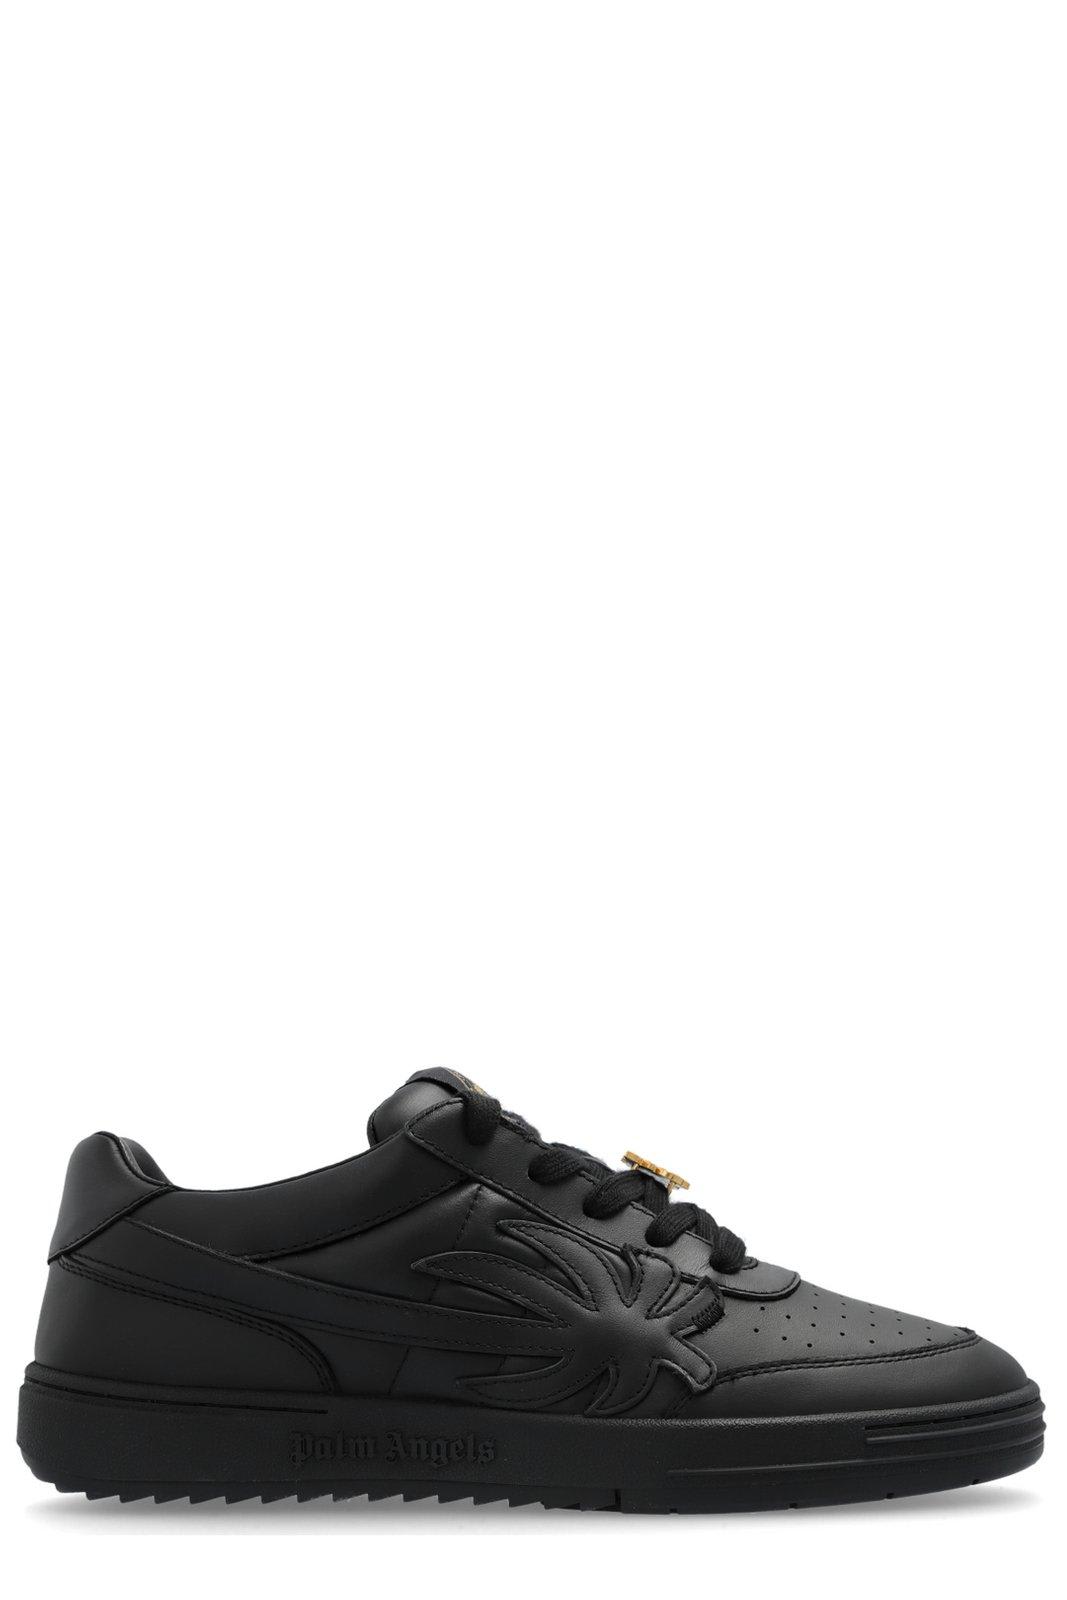 Palm Angels Palm Beach University Low-top Sneakers In Black